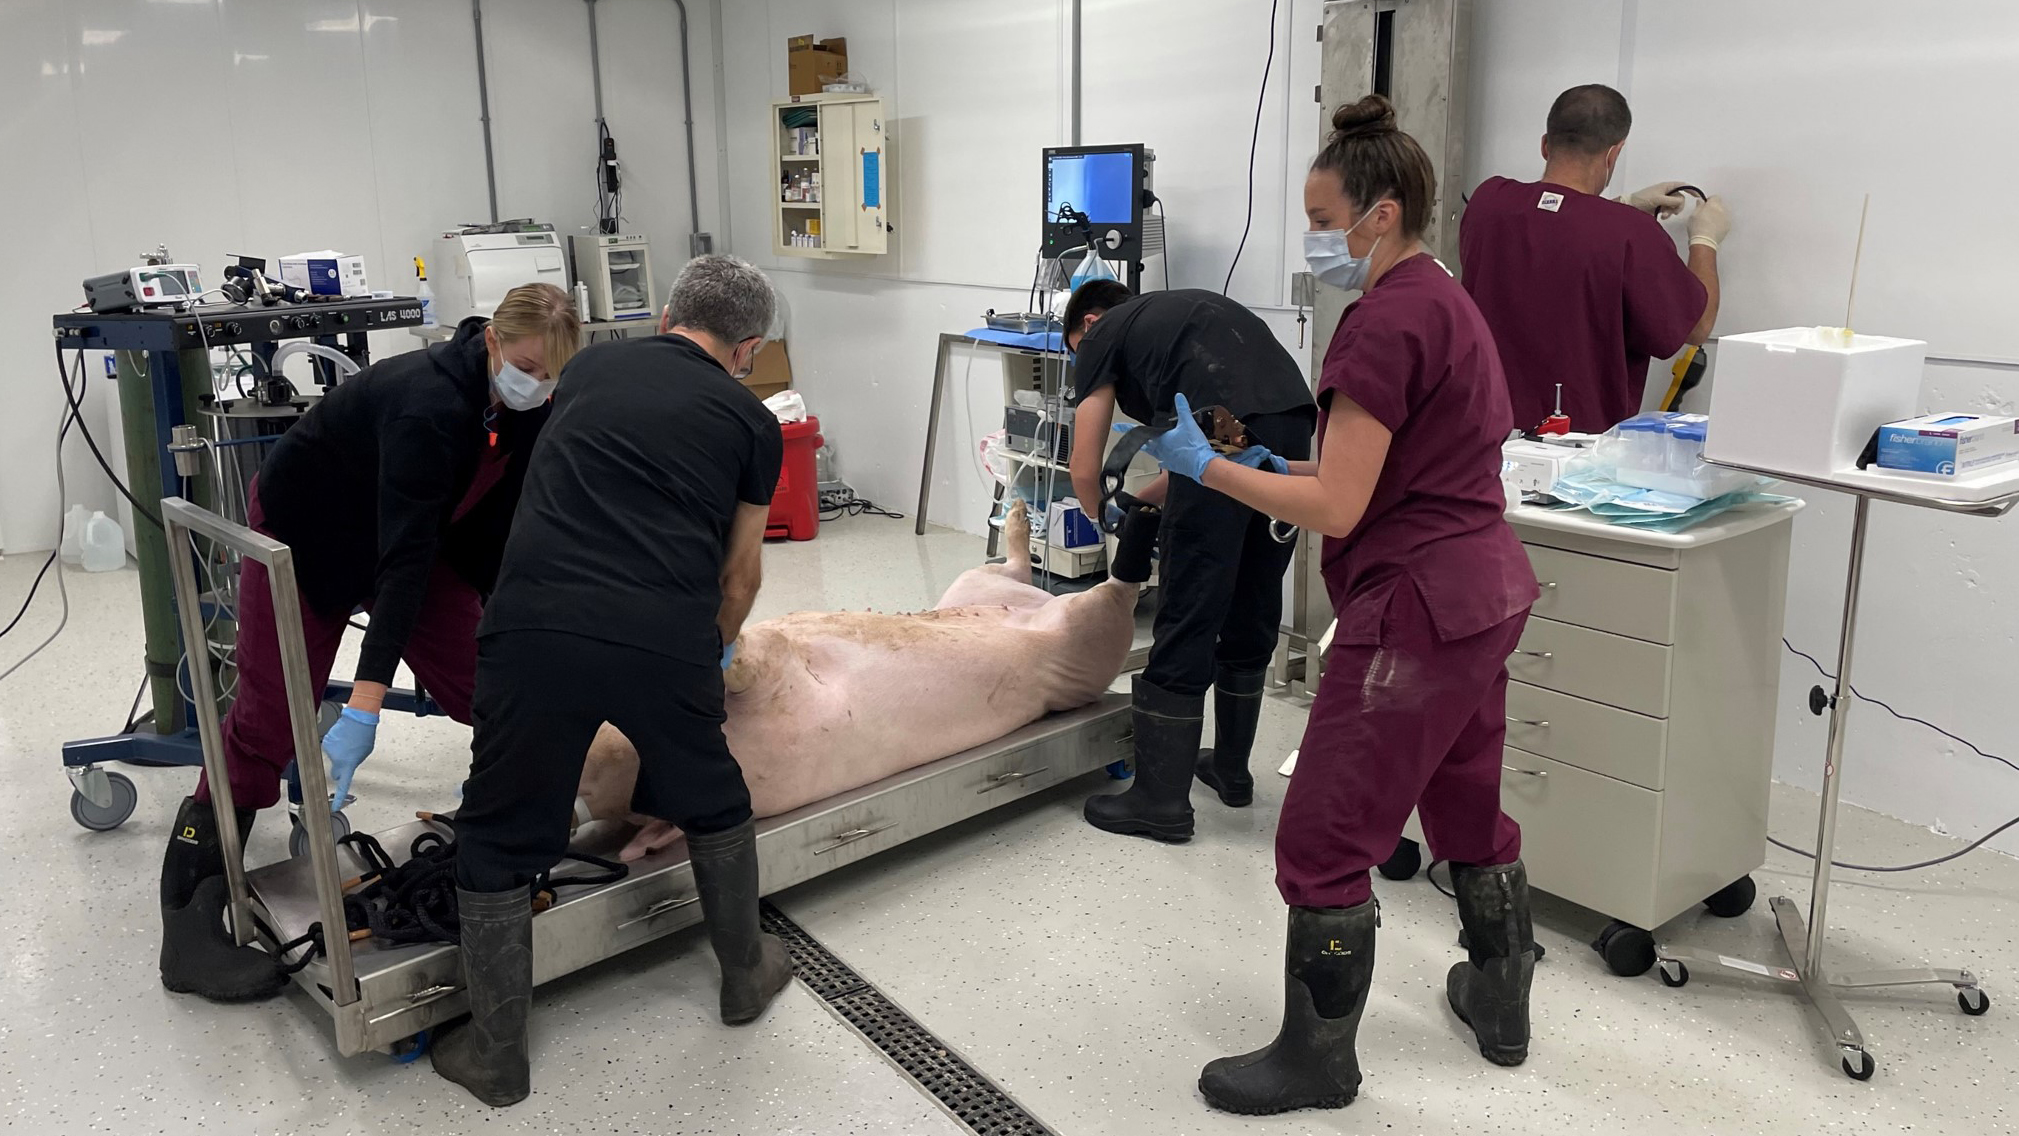 Five masked people in a lab doing tasks around a sedated donor pig laying on a metal bed